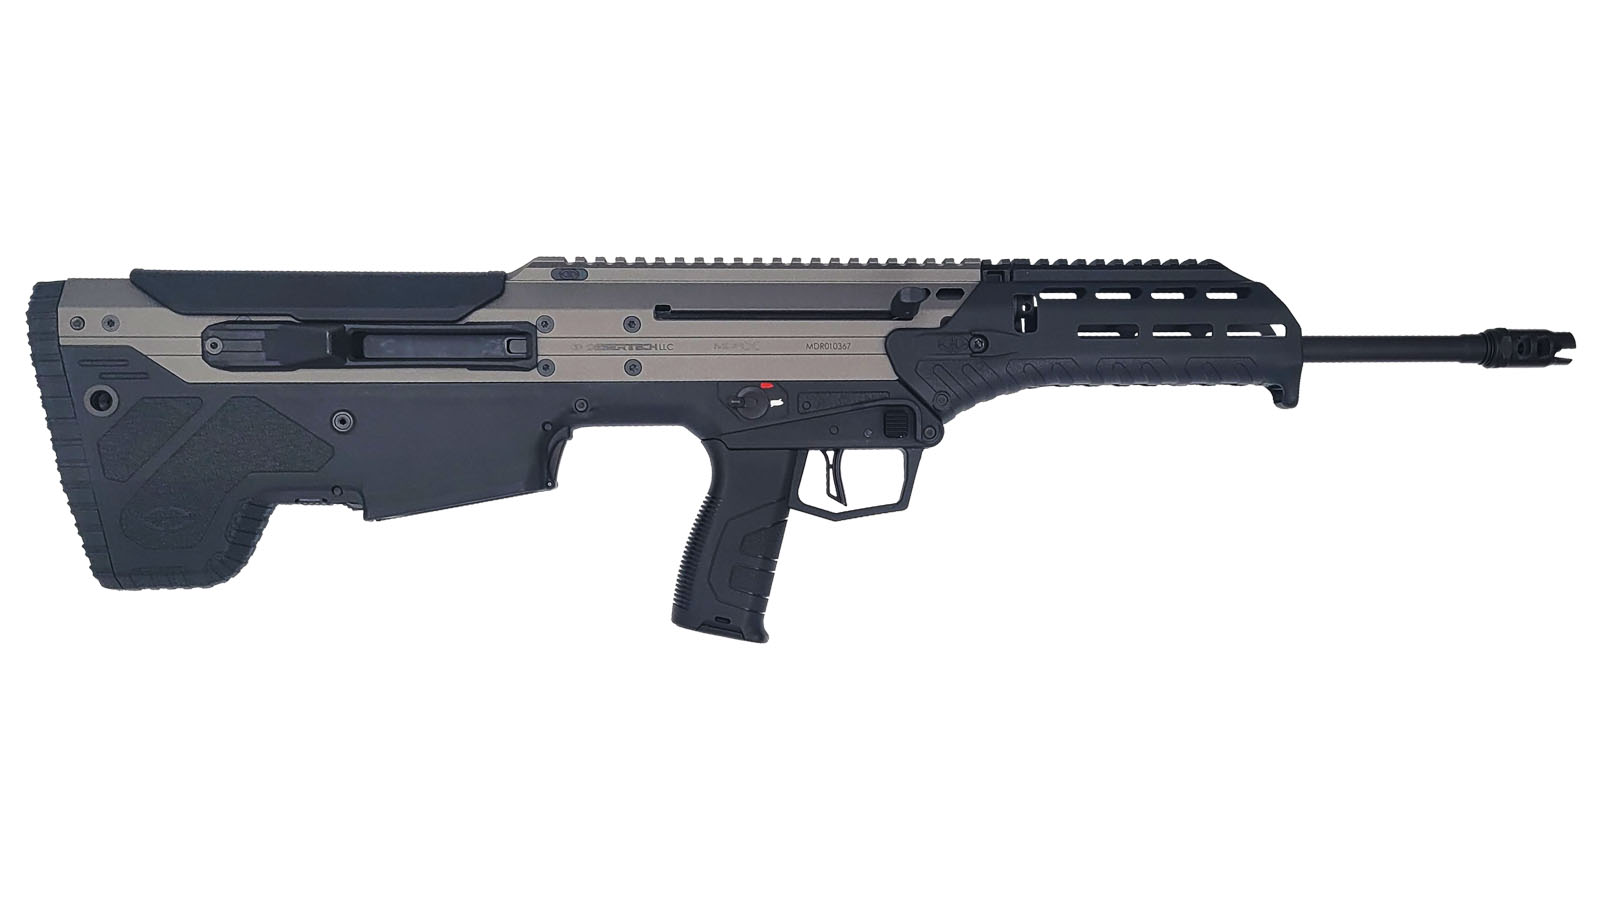 MDRx Rifle, 556NATO 223Rem 20" 10rd Side-Ejection Tungsten